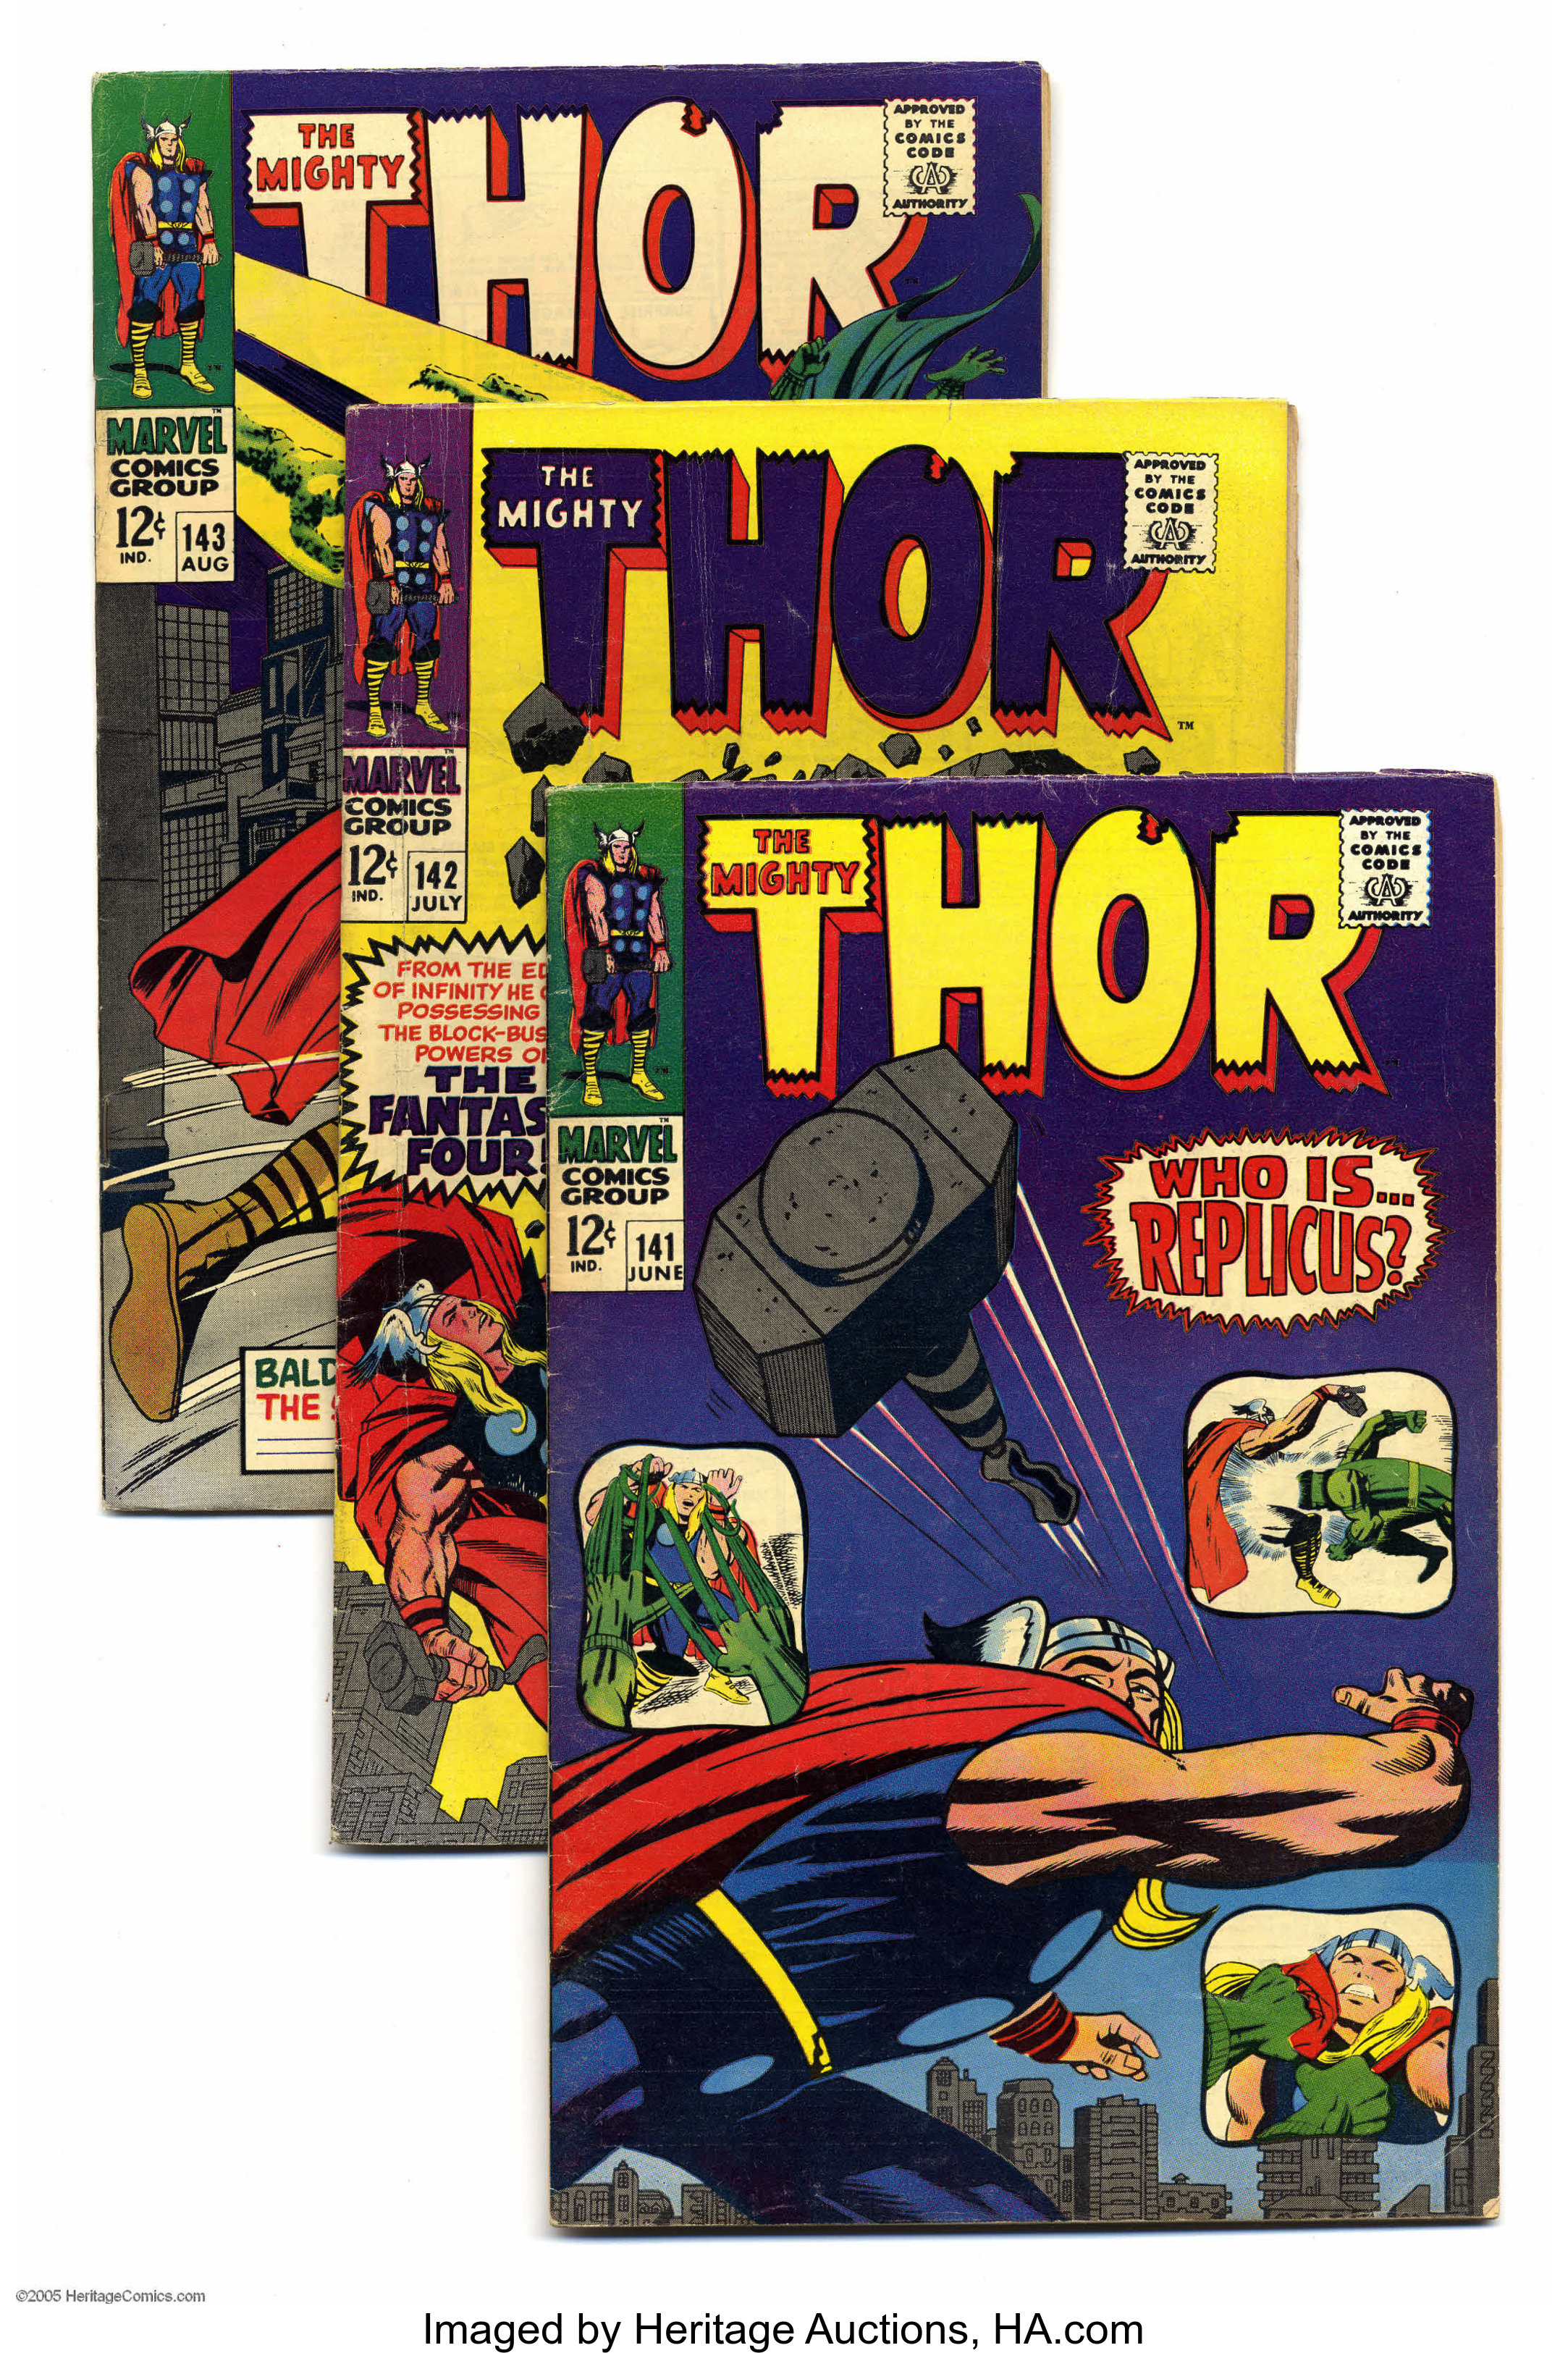 Thor #141-158 Group (Marvel, 1967-68) Condition: VG/FN. This group | Lot  #16761 | Heritage Auctions